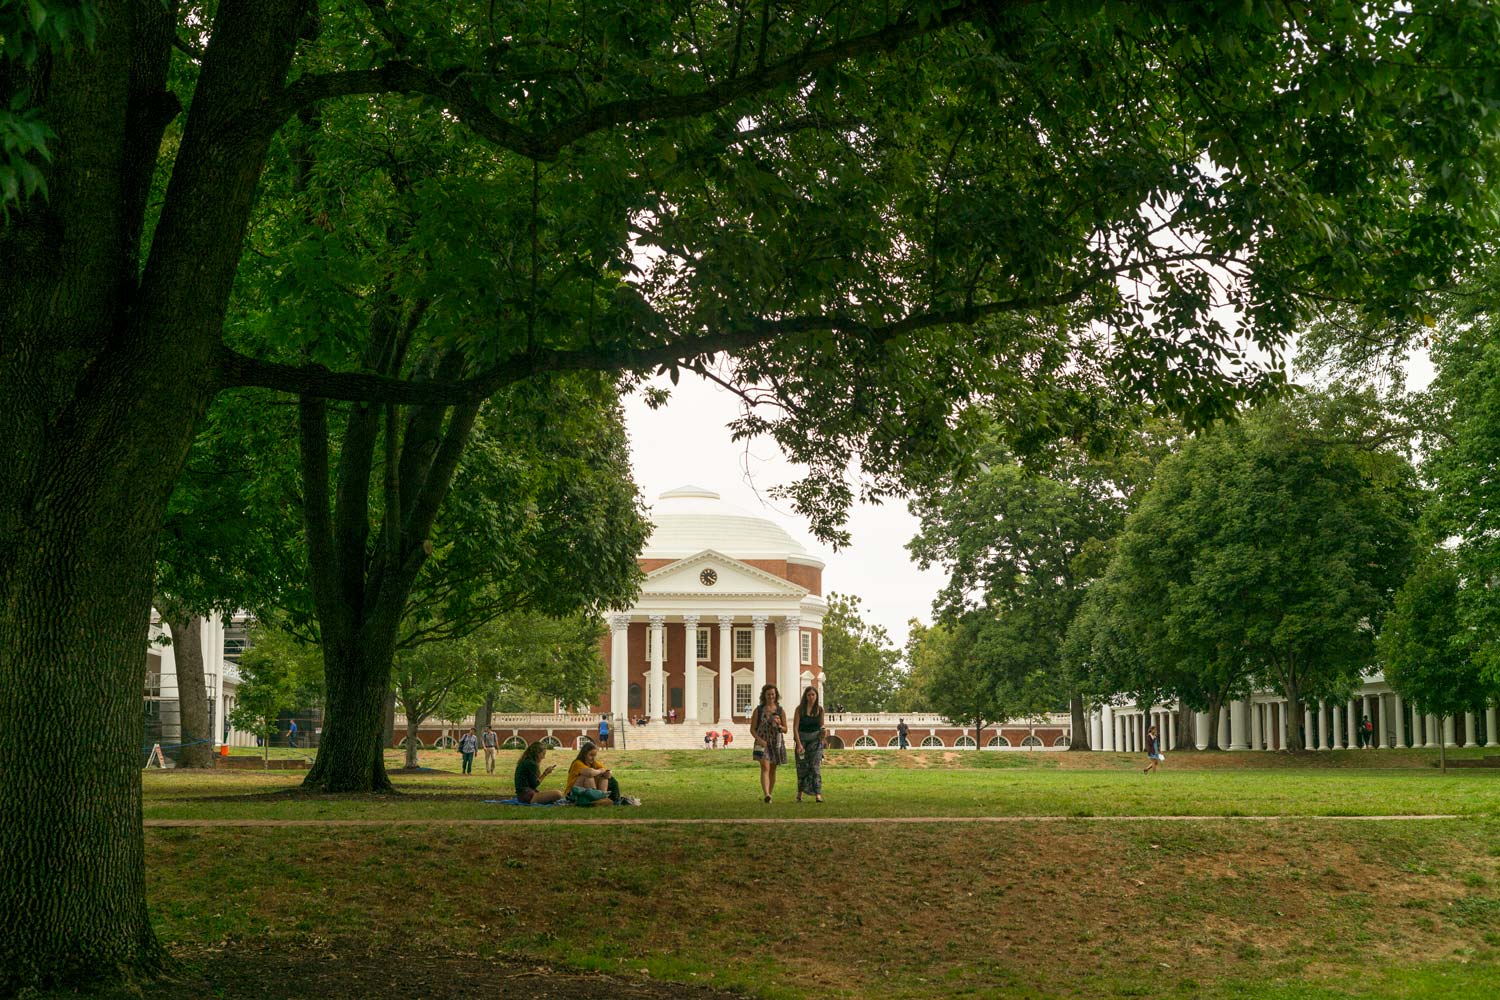 Rotunda with green trees on the Lawn